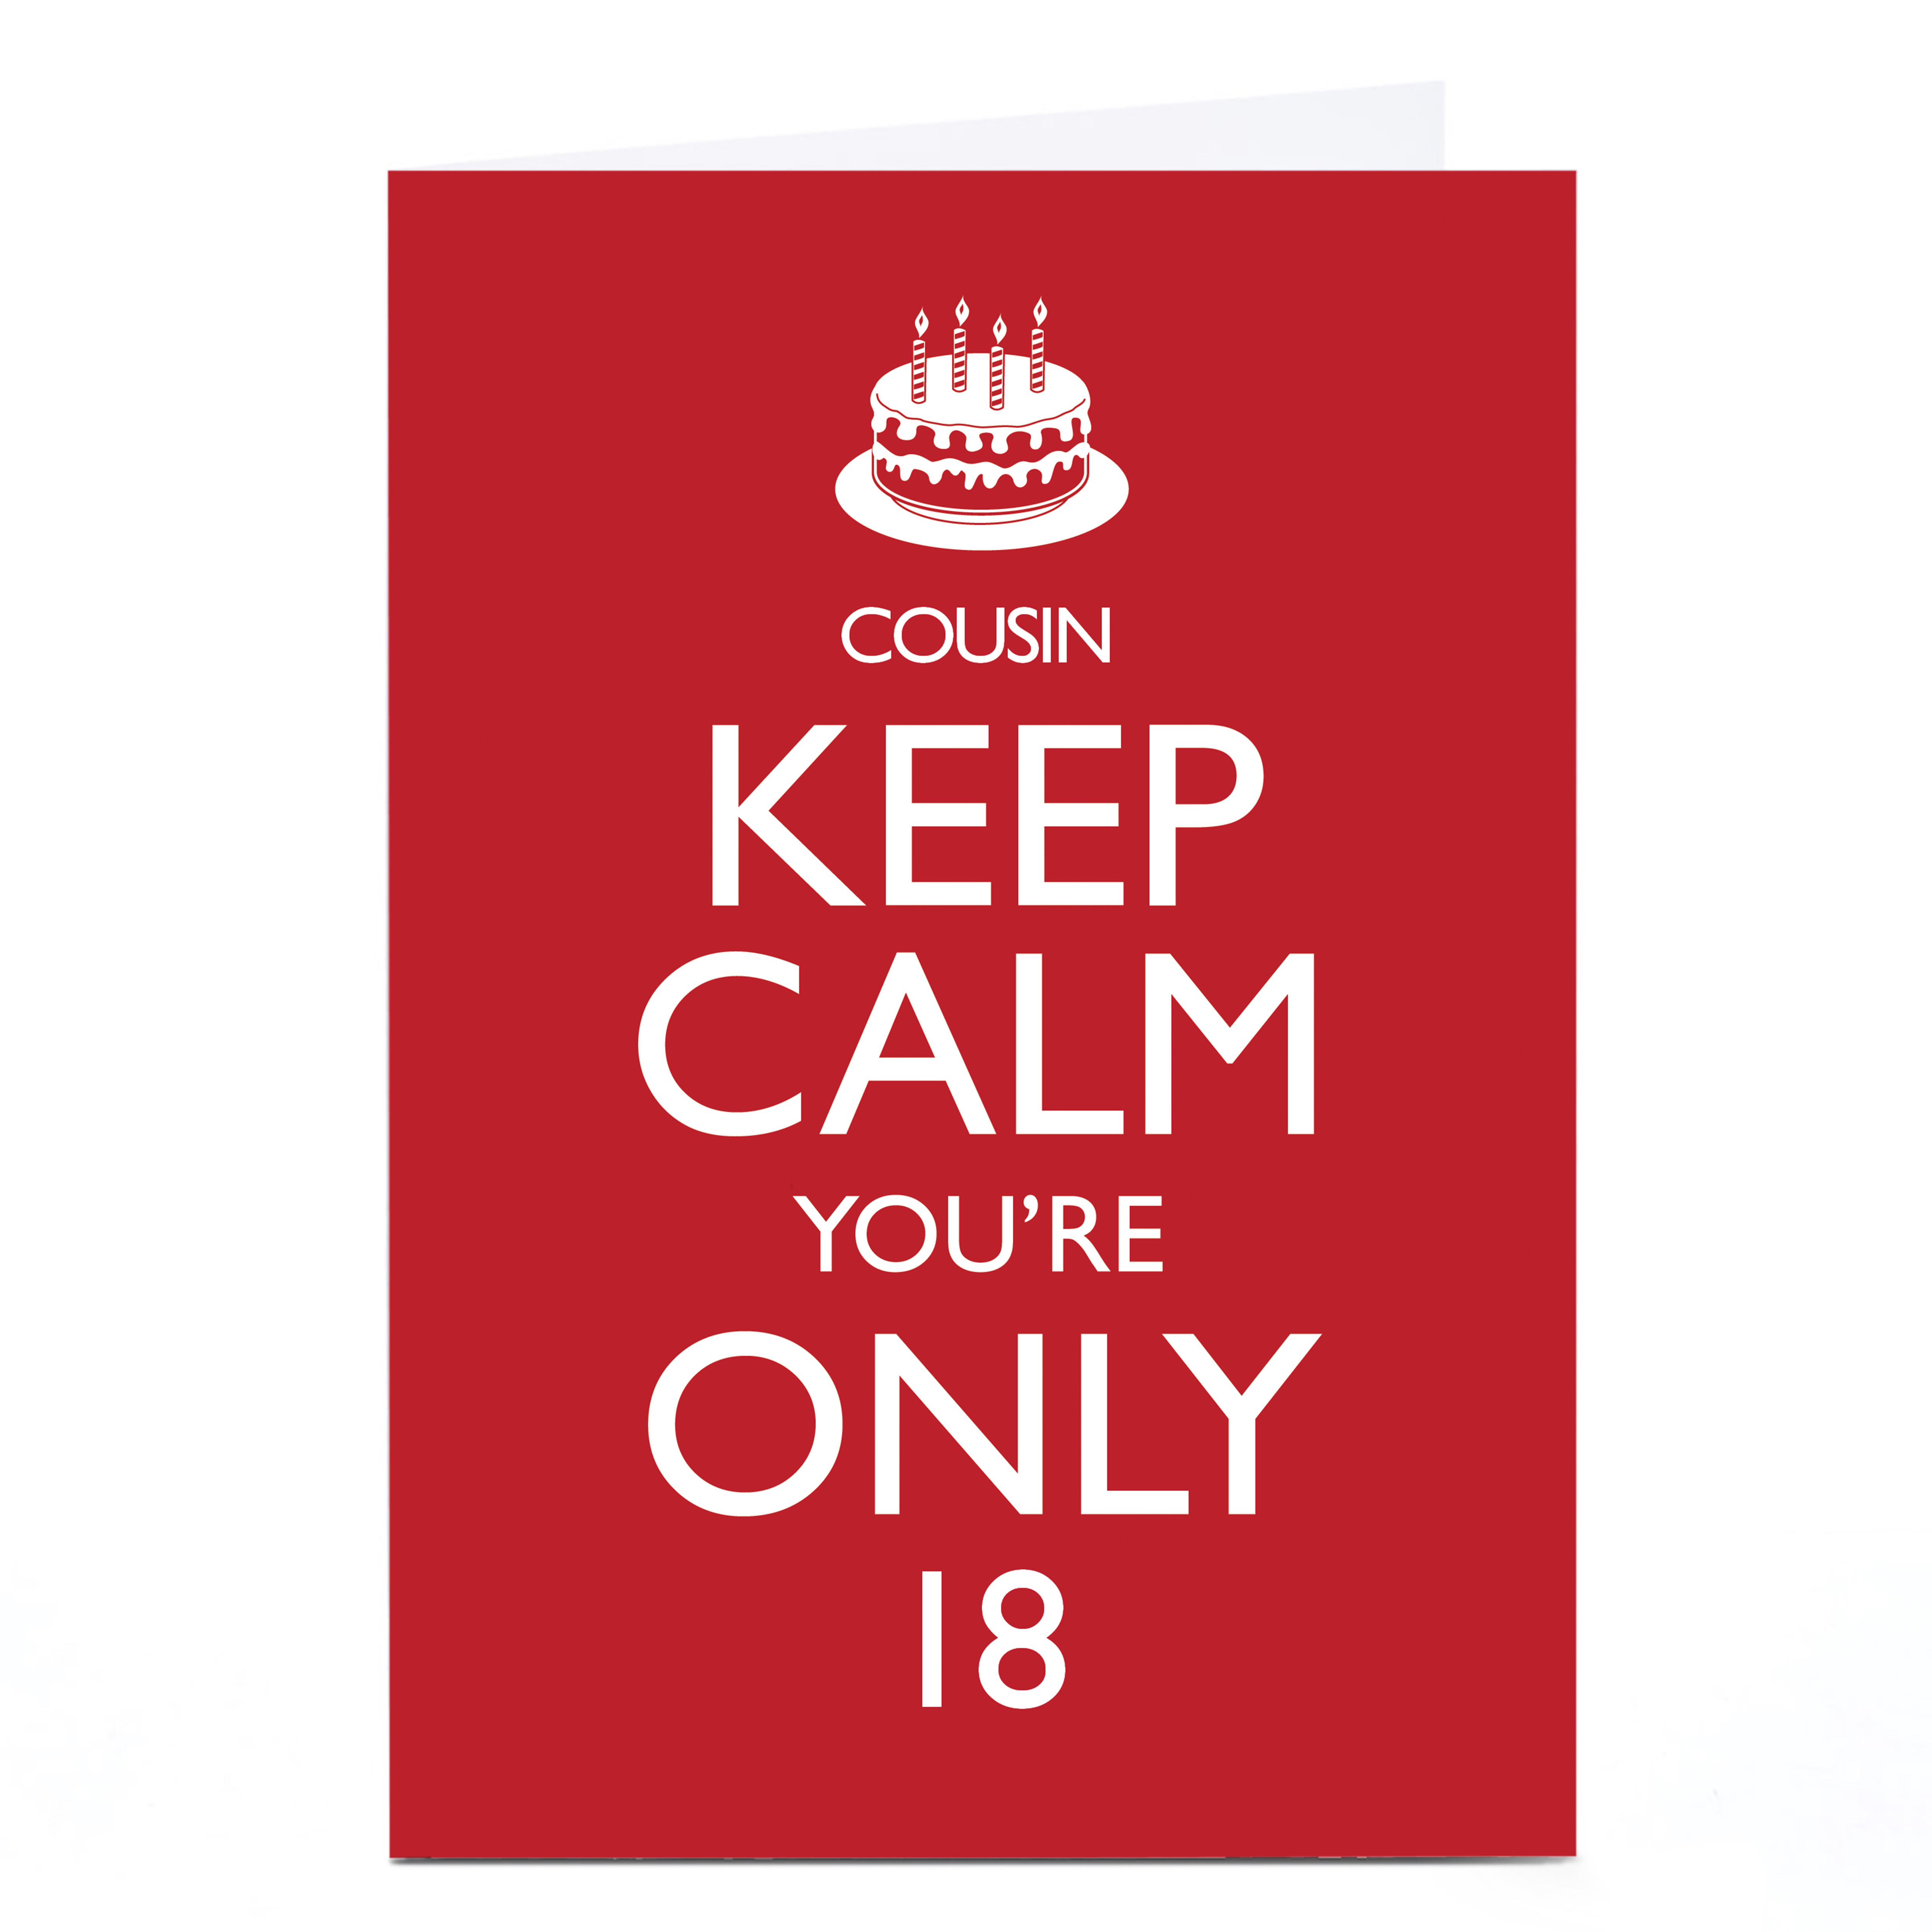 Personalised Any Age Birthday Card - Keep Calm, Cousin